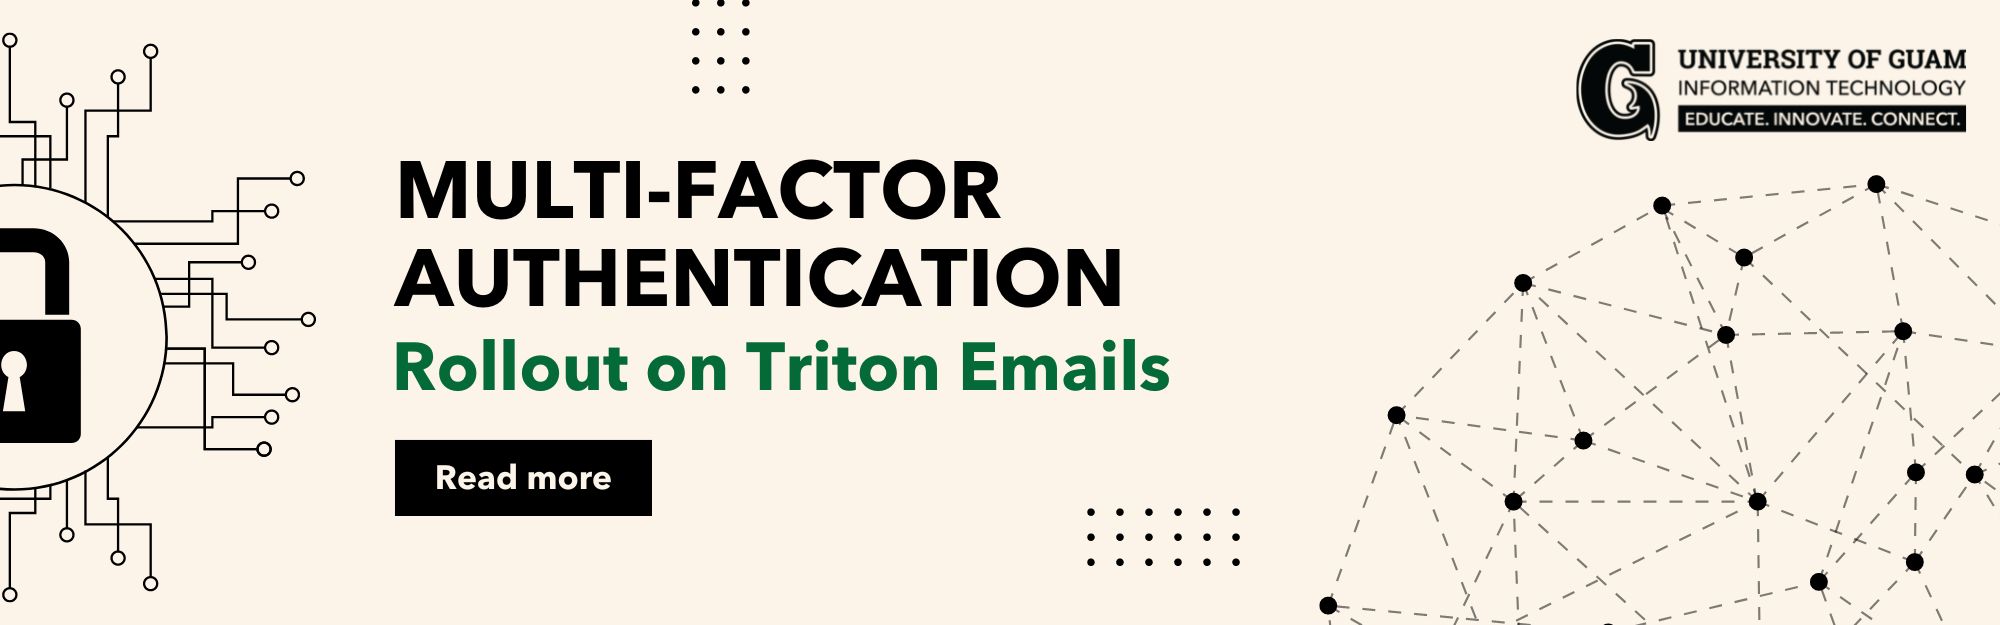 Multi-factor authentication is being implemented for all Triton Emails. Click to learn more